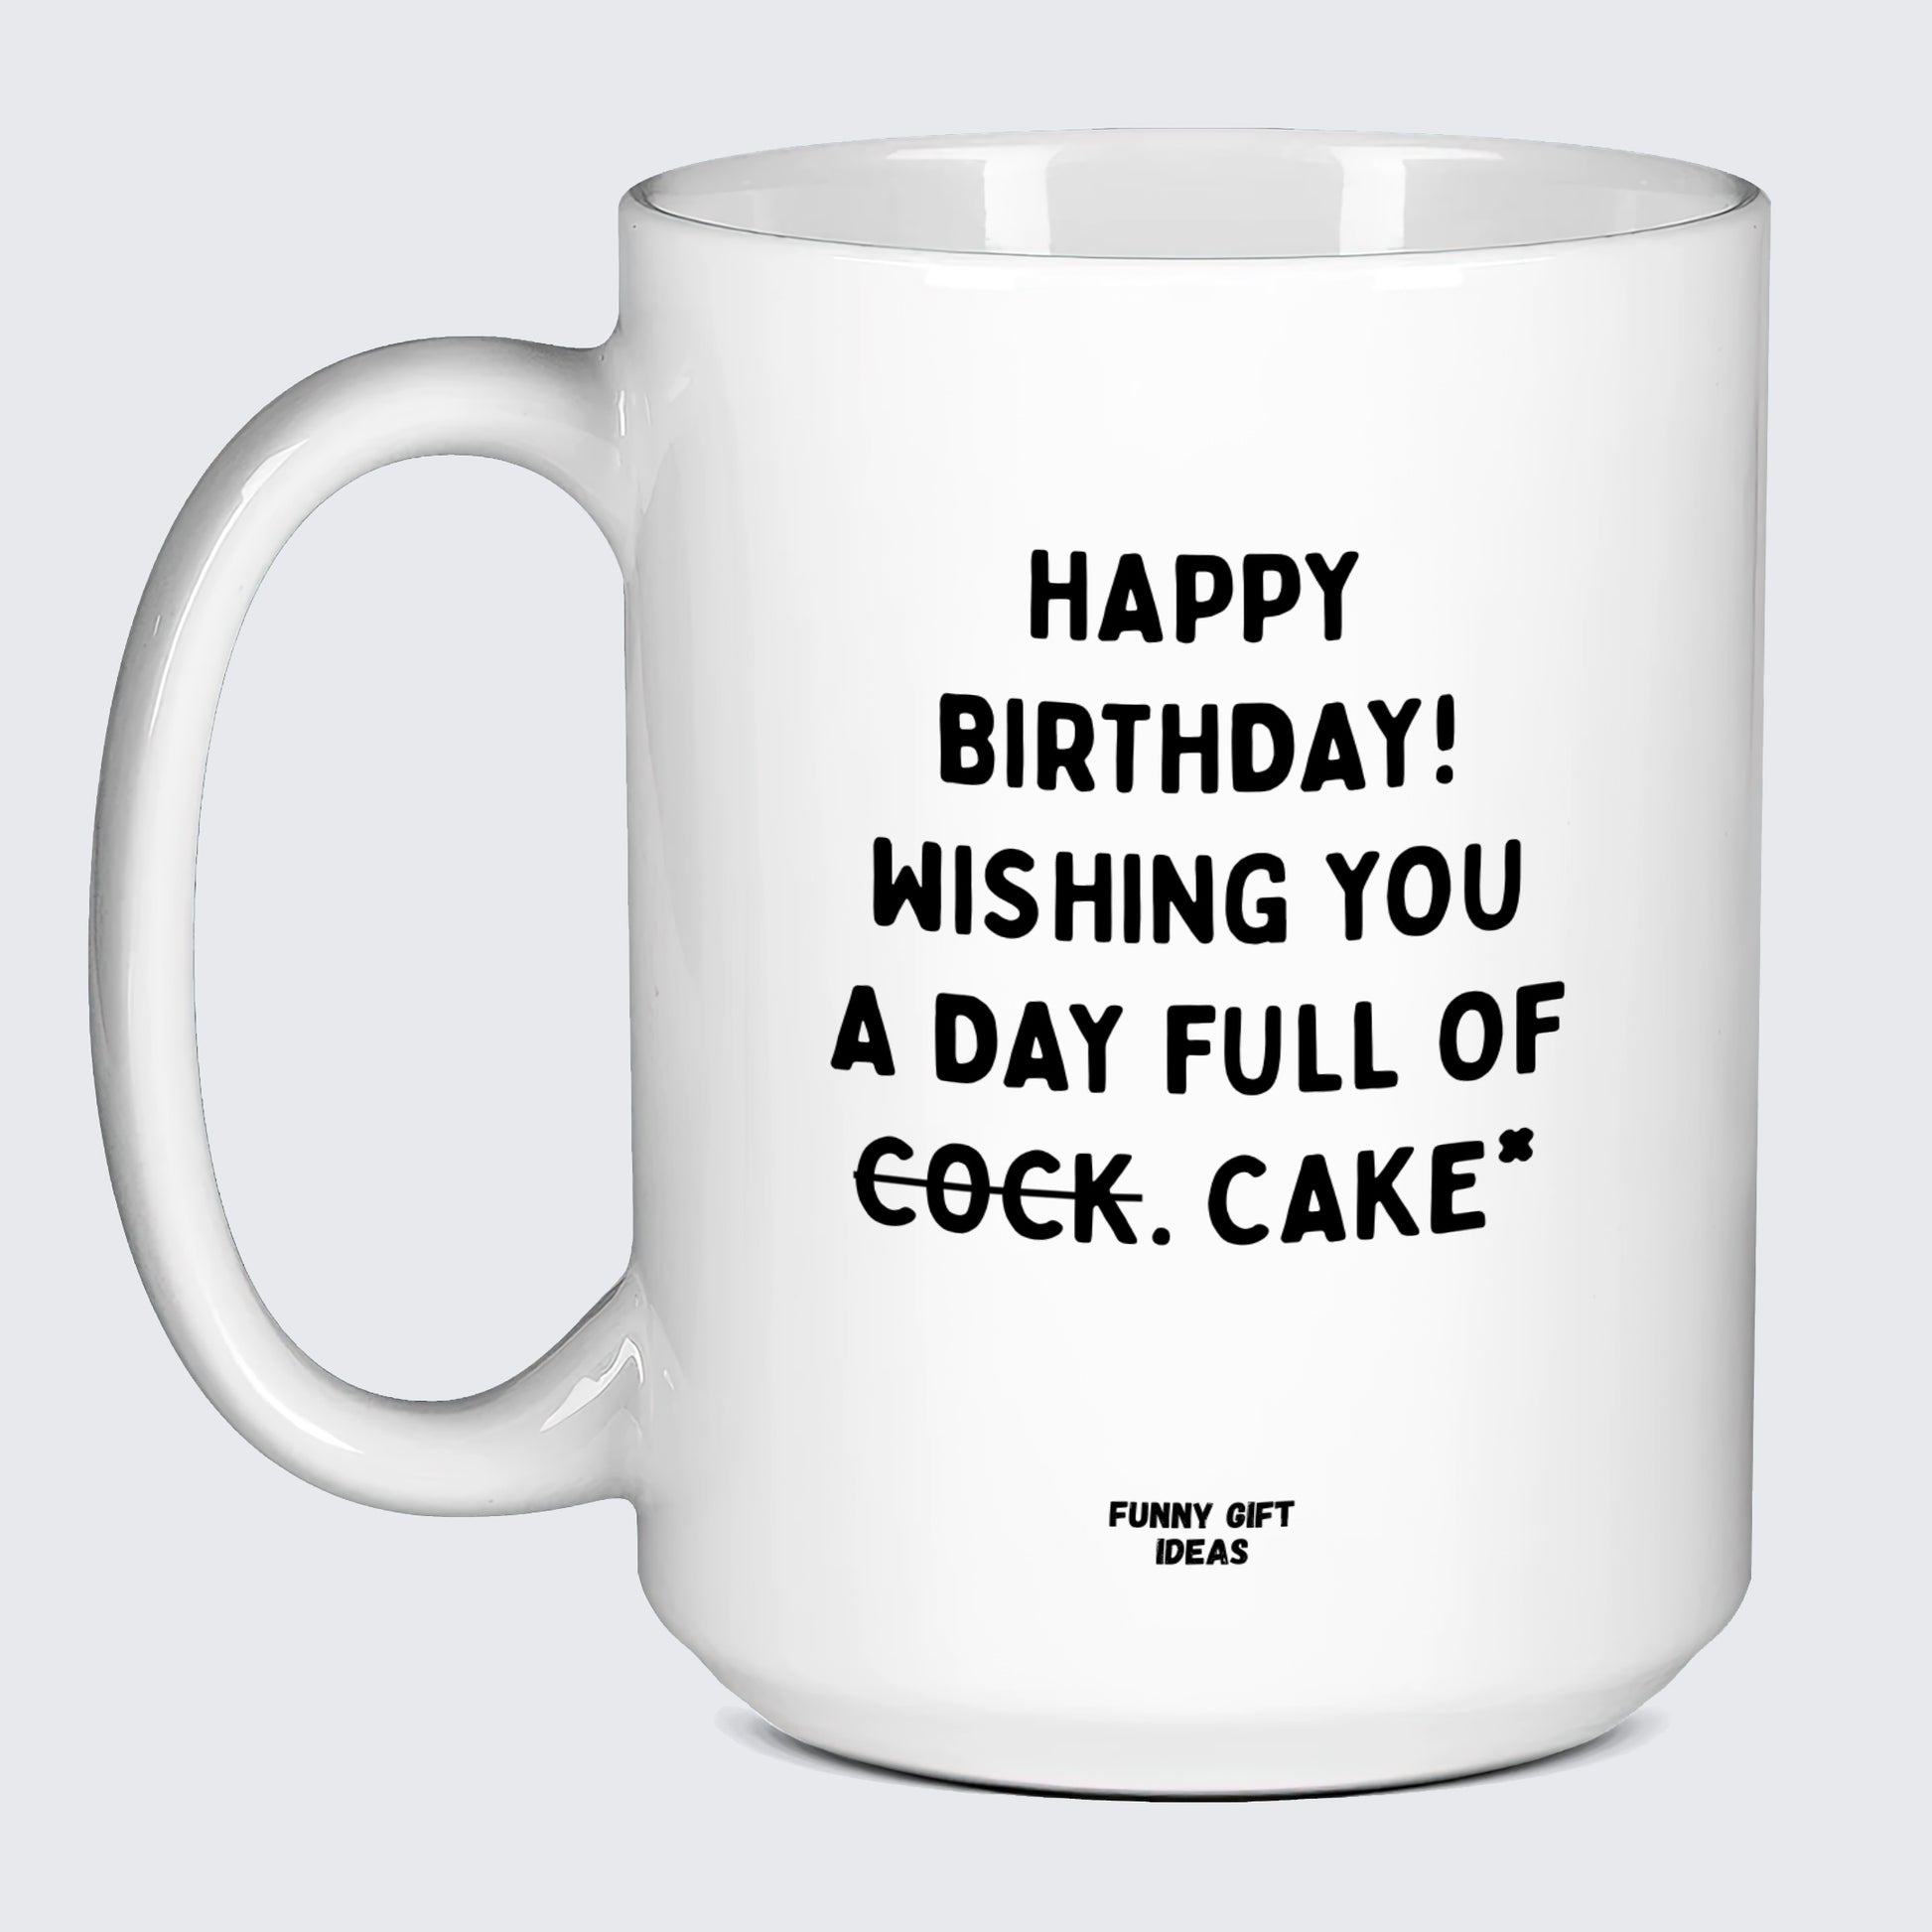 Birthday Present Happy Birthday! Wishing You a Day Full of Cock. Cake* - Funny Gift Ideas